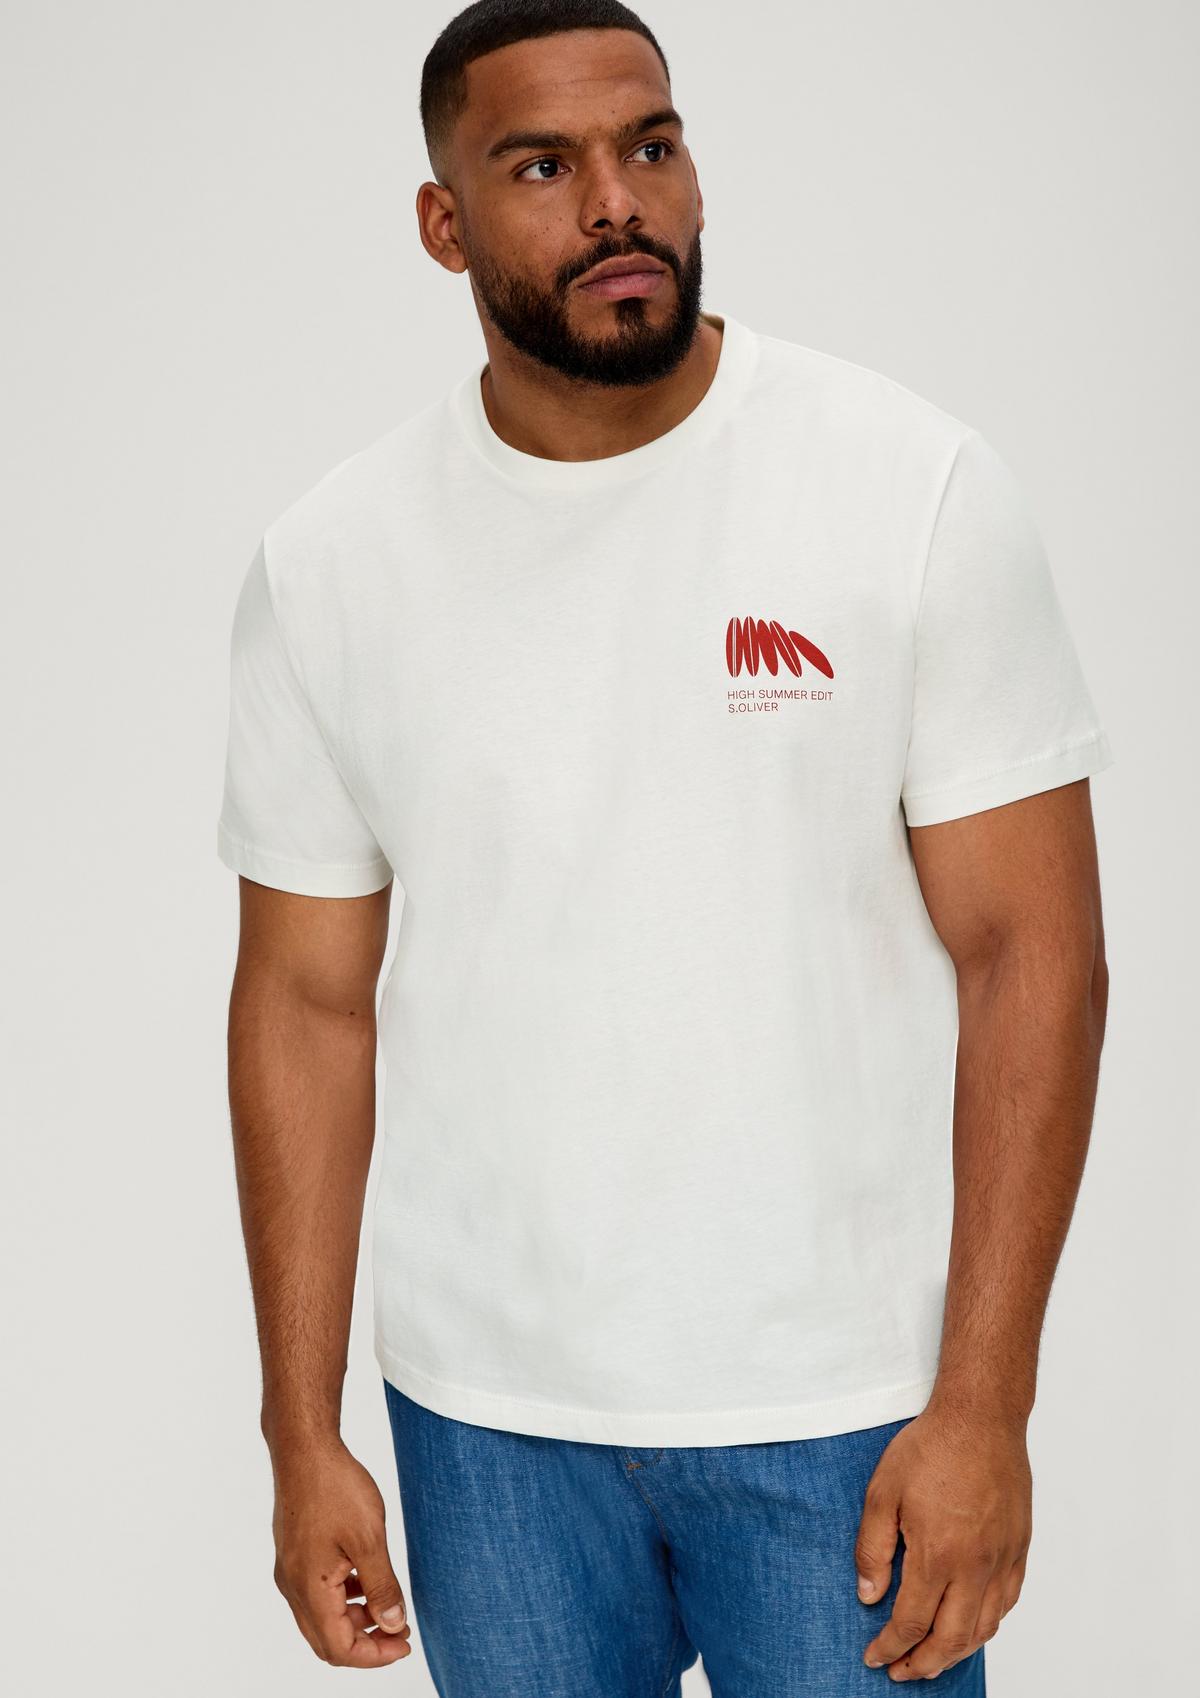 Cotton T-shirt with a front - white print